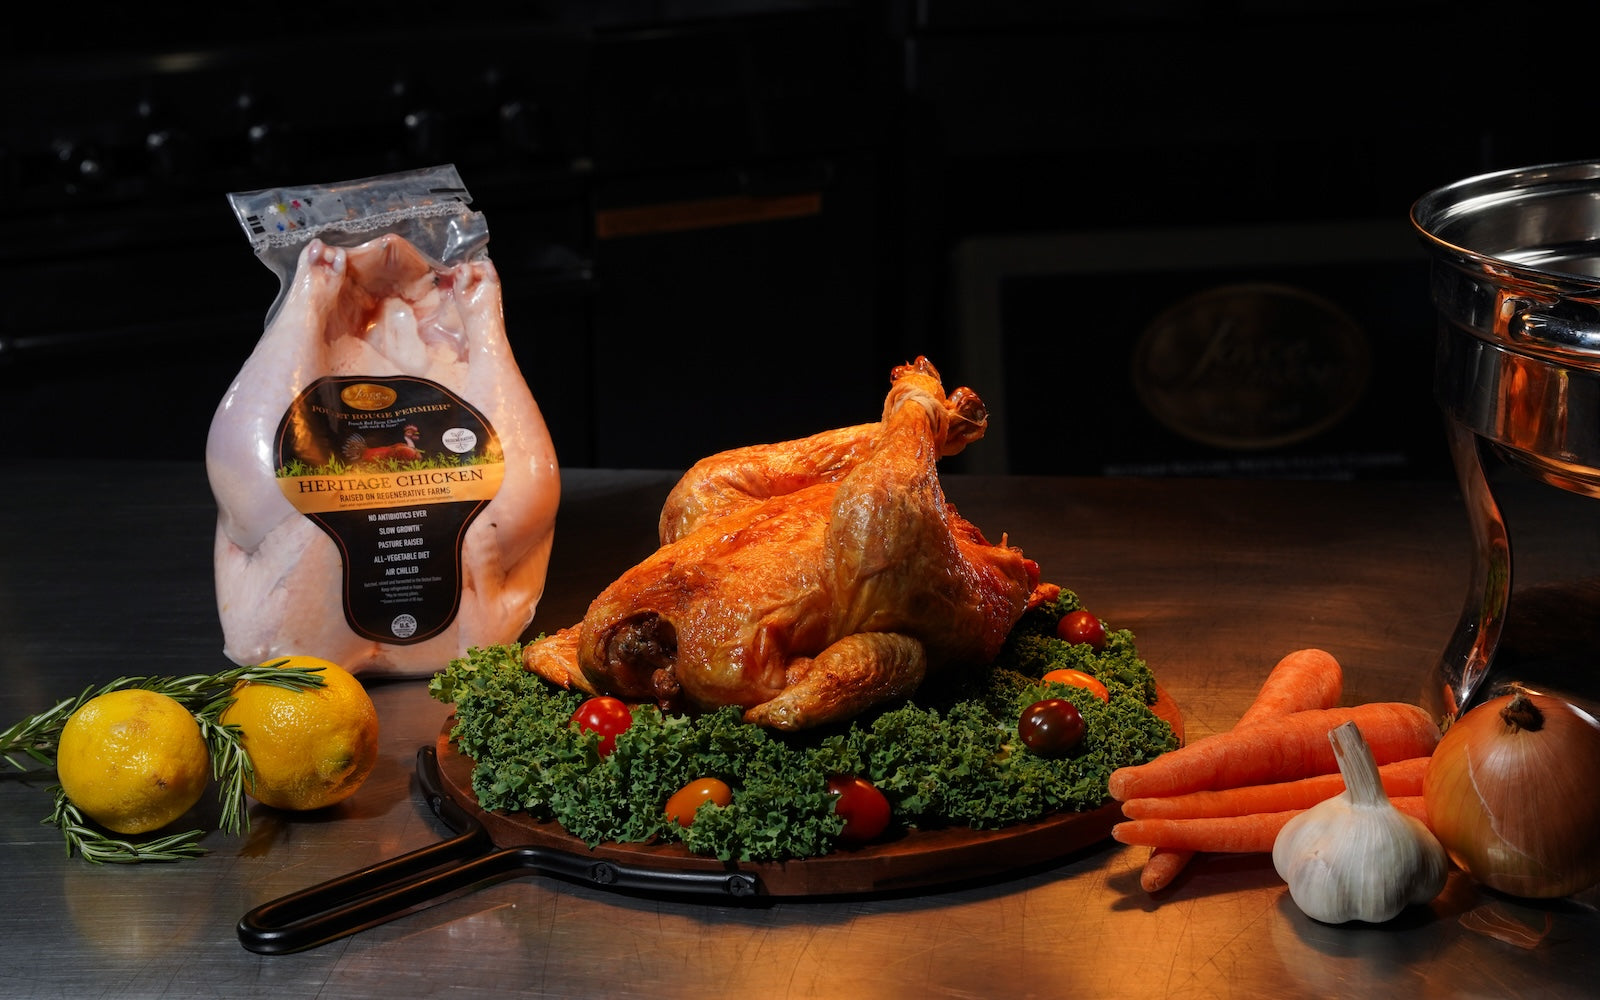 Image of cooked Poulet Rouge® Heritage Chicken from Joyce Farms on bed of greens and baby tomatoes, with packaged, raw Poulet Rouge® Heritage Chicken in the background